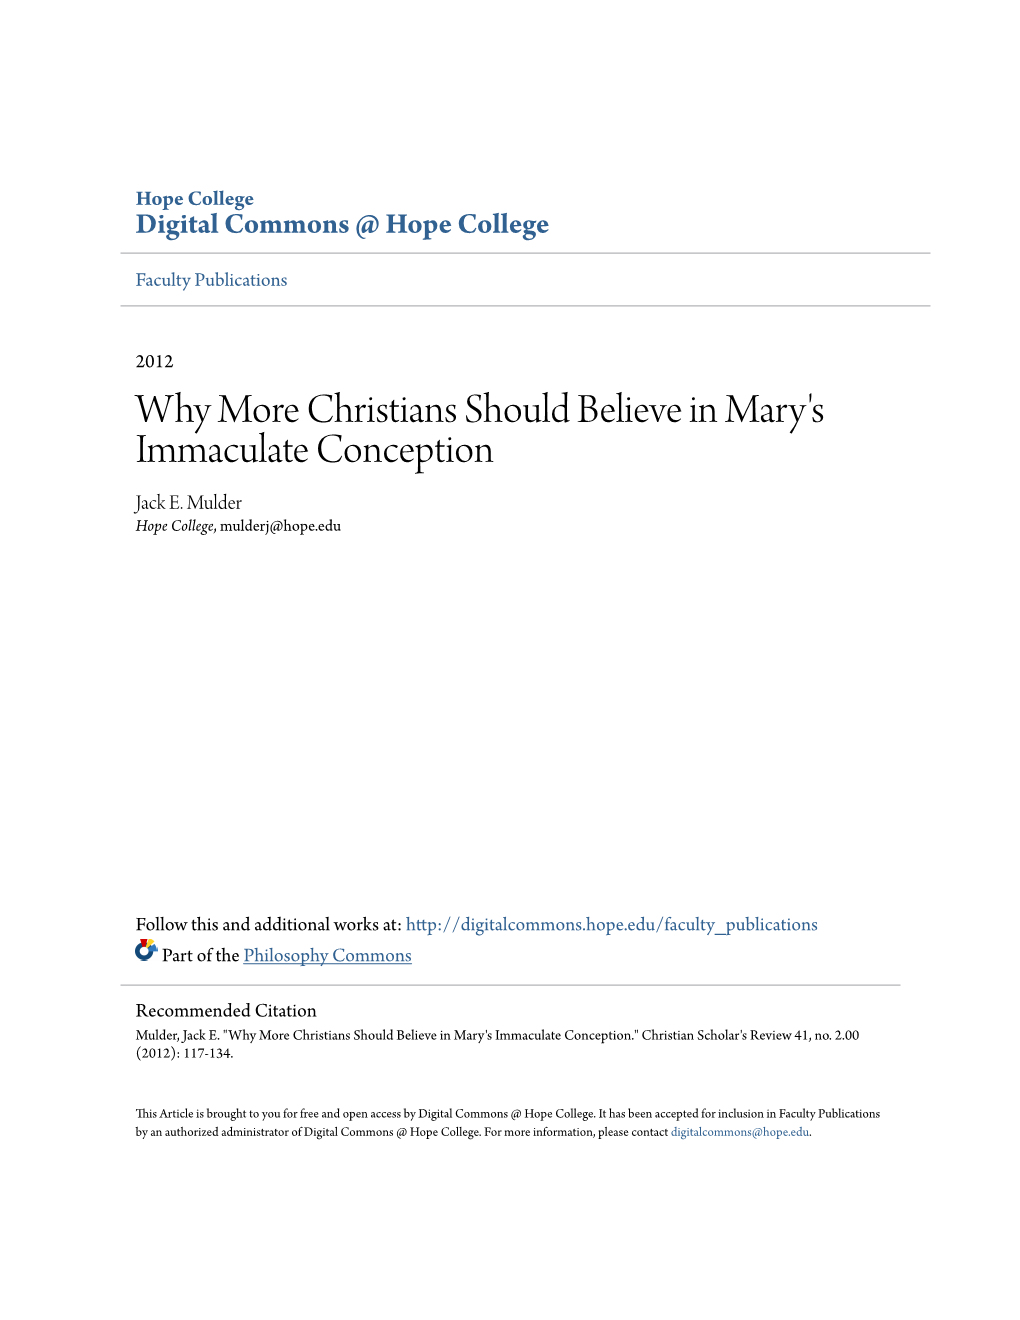 Why More Christians Should Believe in Mary's Immaculate Conception Jack E